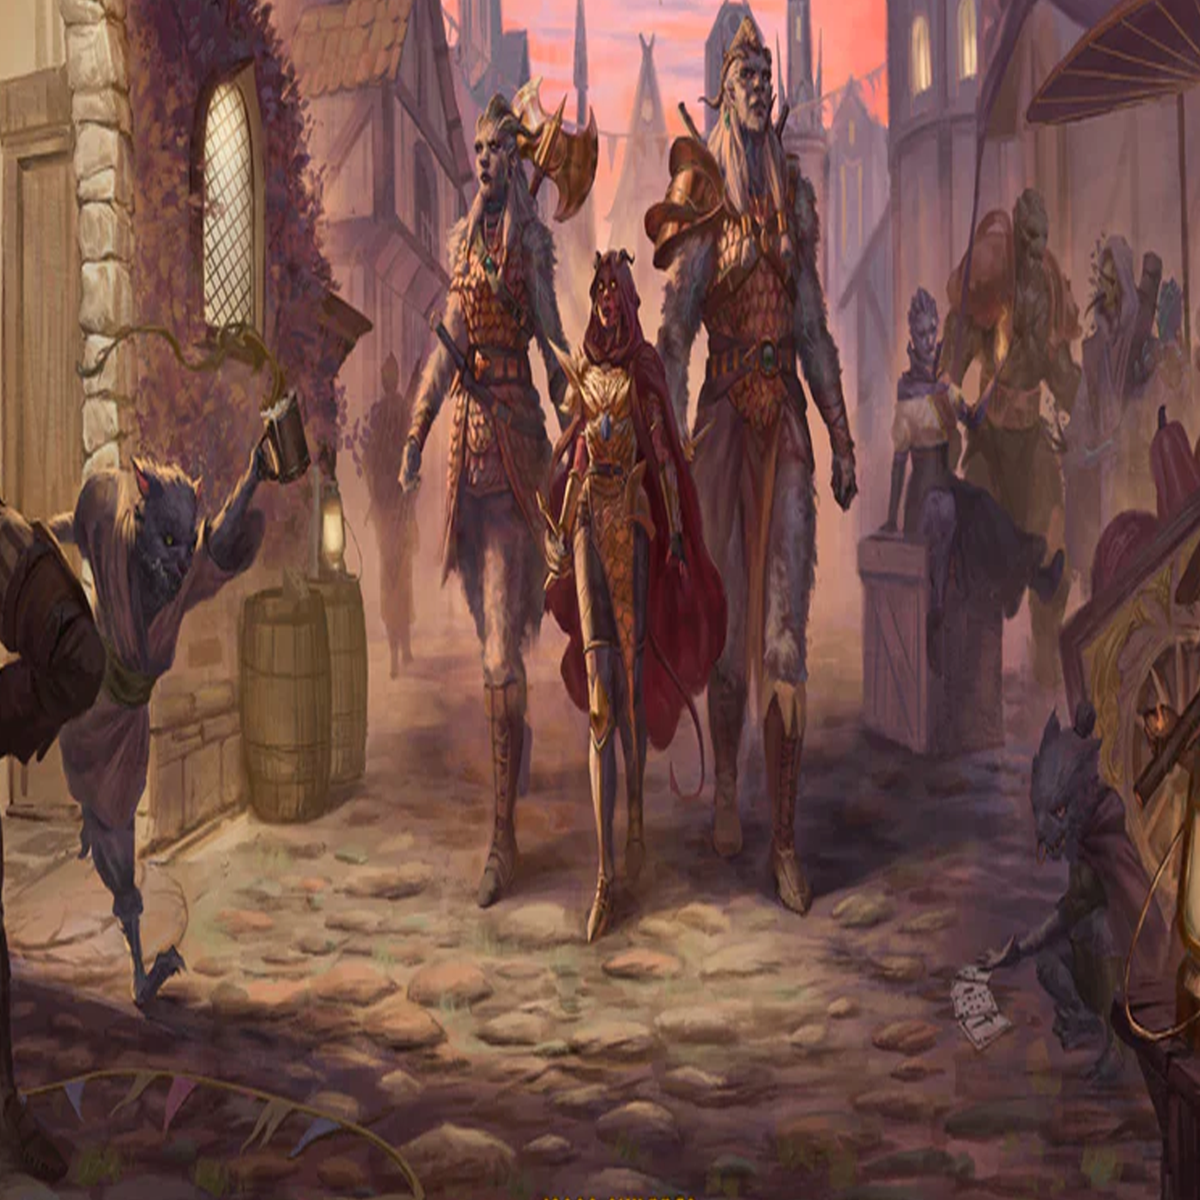 https://assetsio.gnwcdn.com/gloomhaven-second-edition-front-cover.png?width=1200&height=1200&fit=crop&quality=100&format=png&enable=upscale&auto=webp